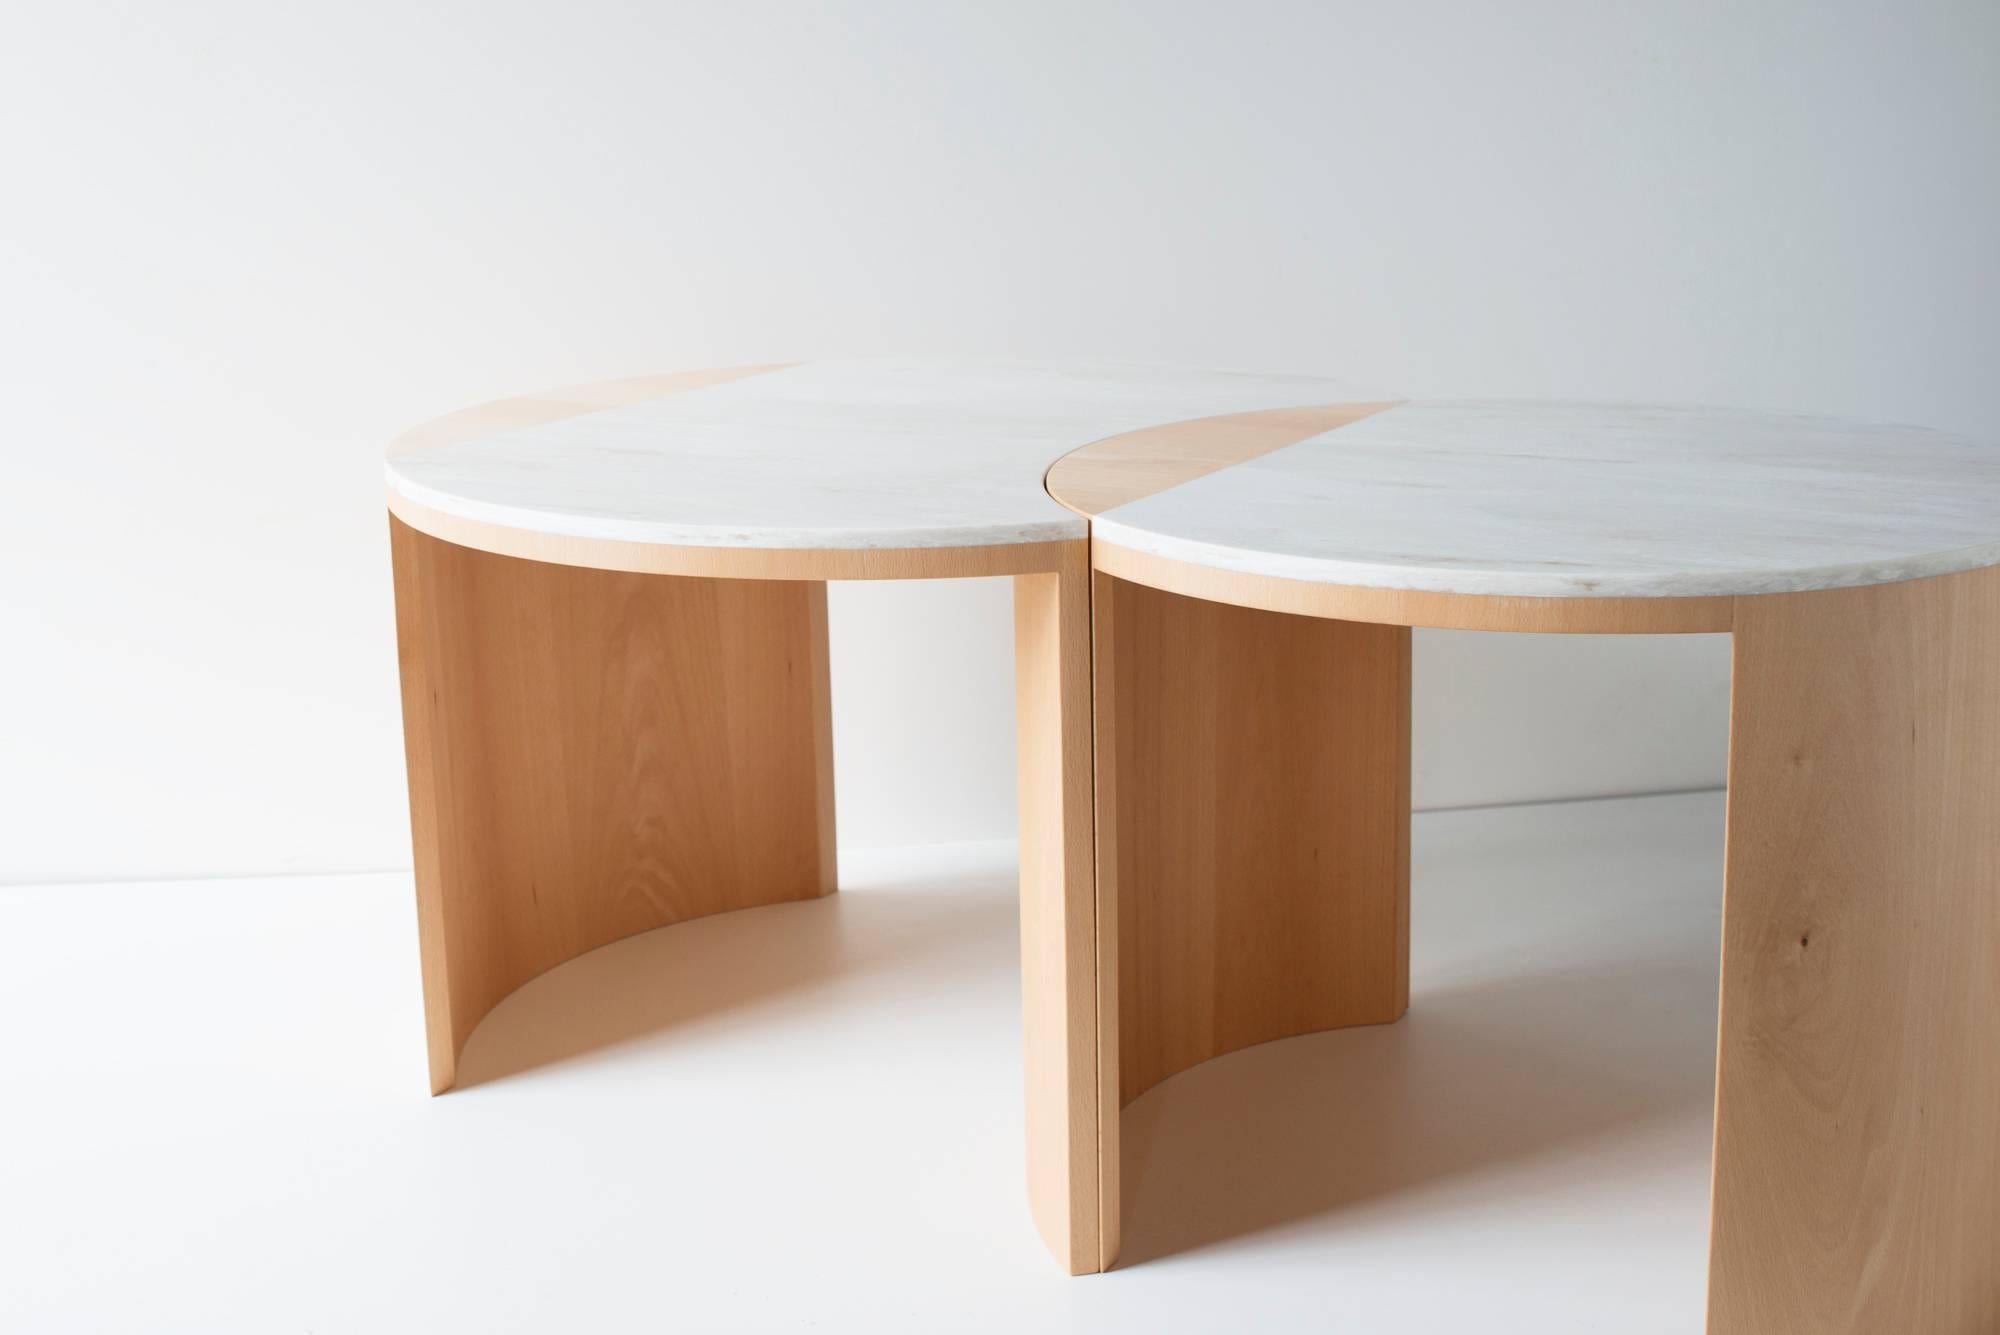 The gibbous coffee table is built in bent plywood, veneer, and Corian. The smaller table is nesting and rotatable, allowing the user an endless number of configurations.

The gibbous coffee table pairs wood and solid surface to create a complex and